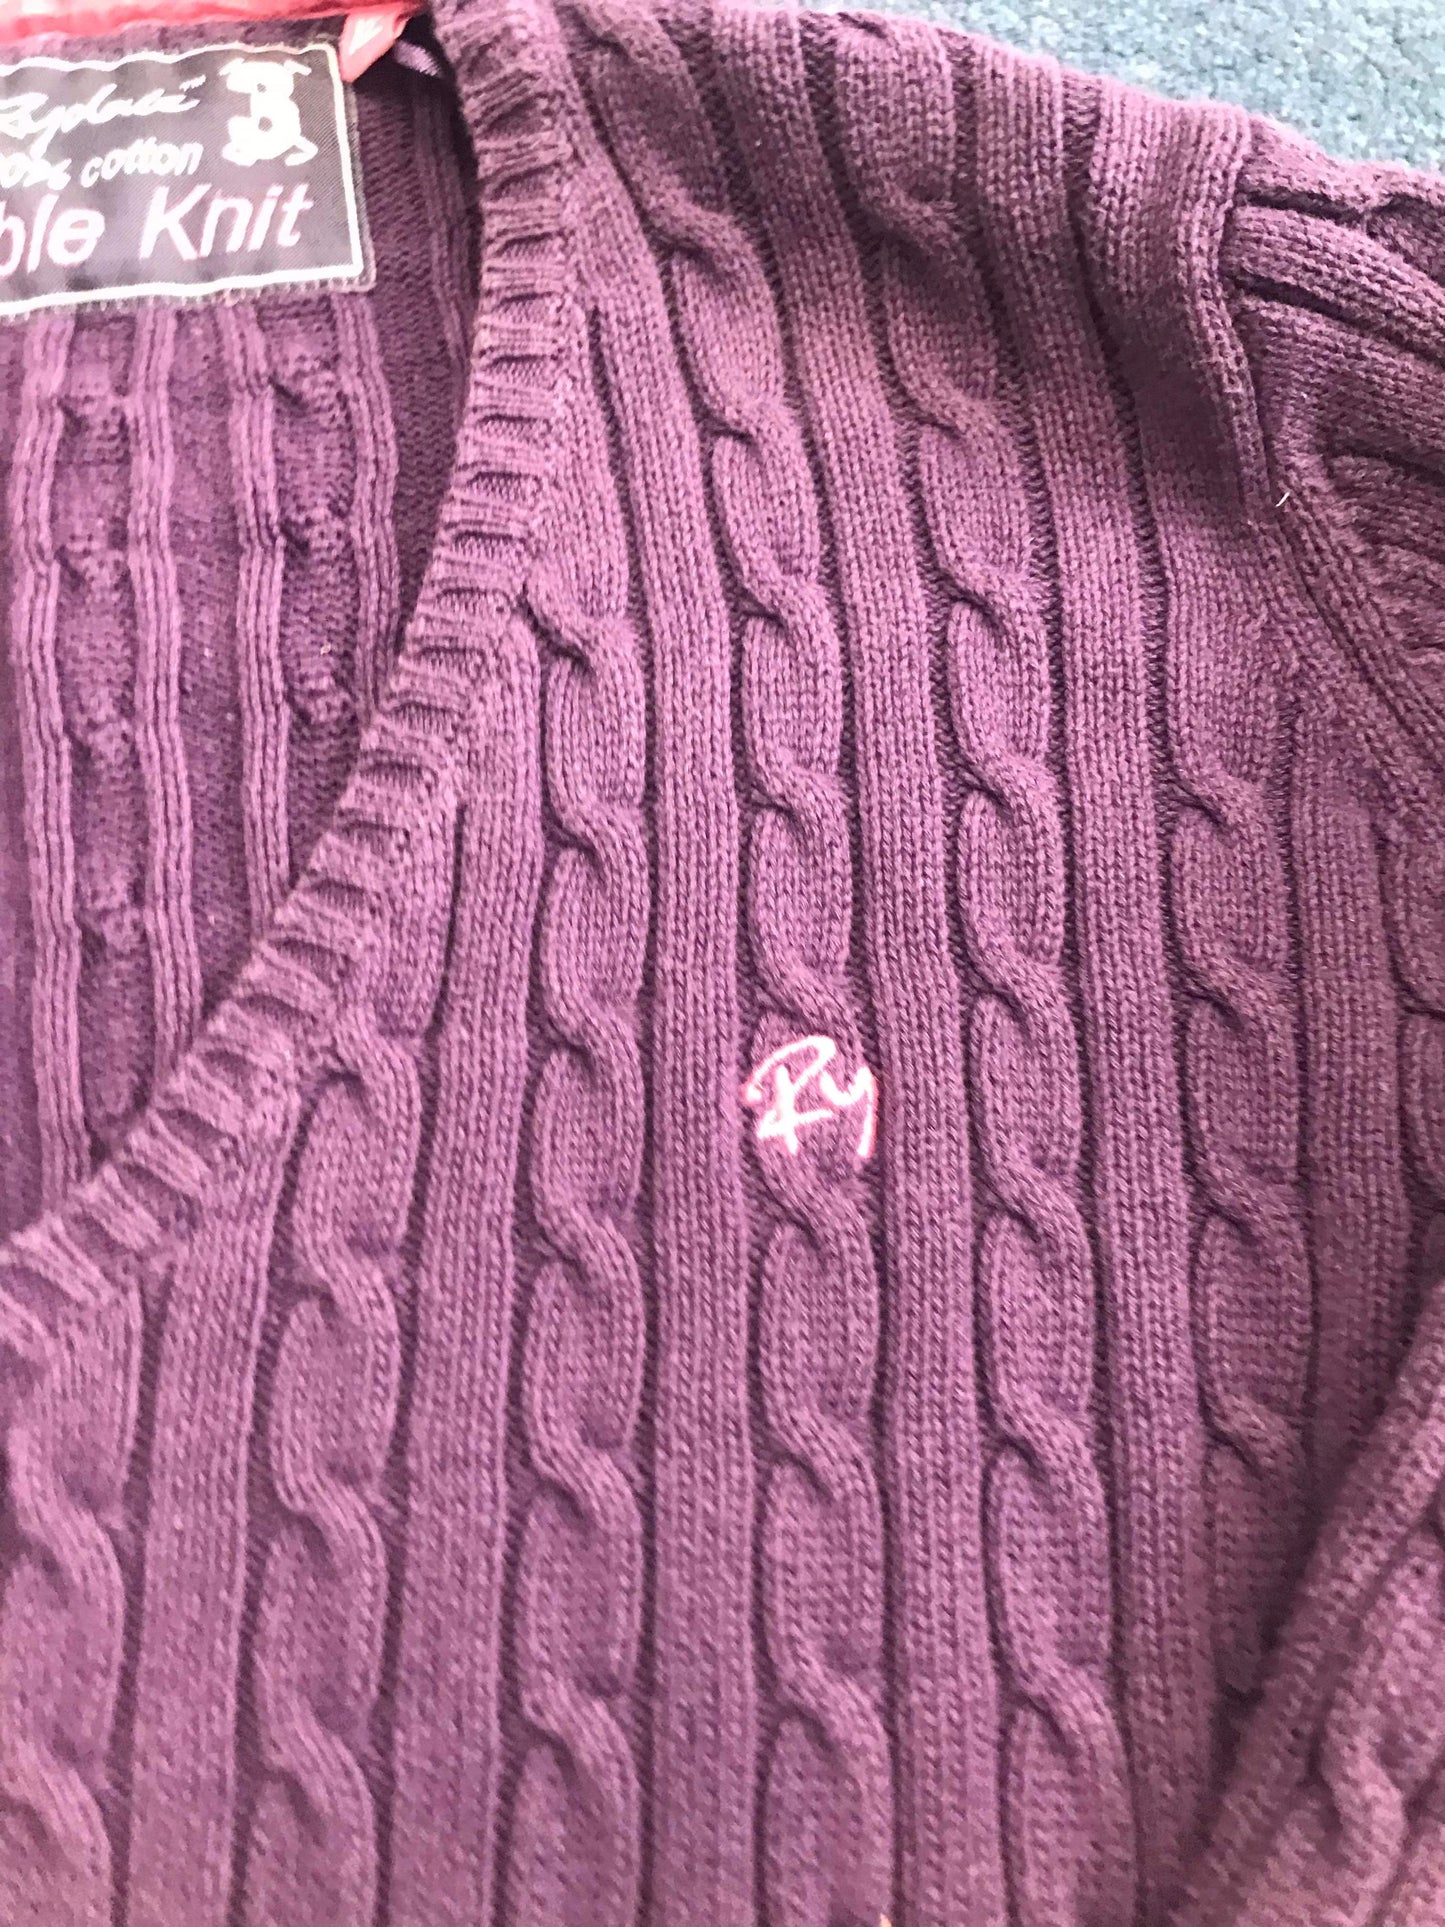 Rydale purple cable knit xl jumper FREE POSTAGE❤️